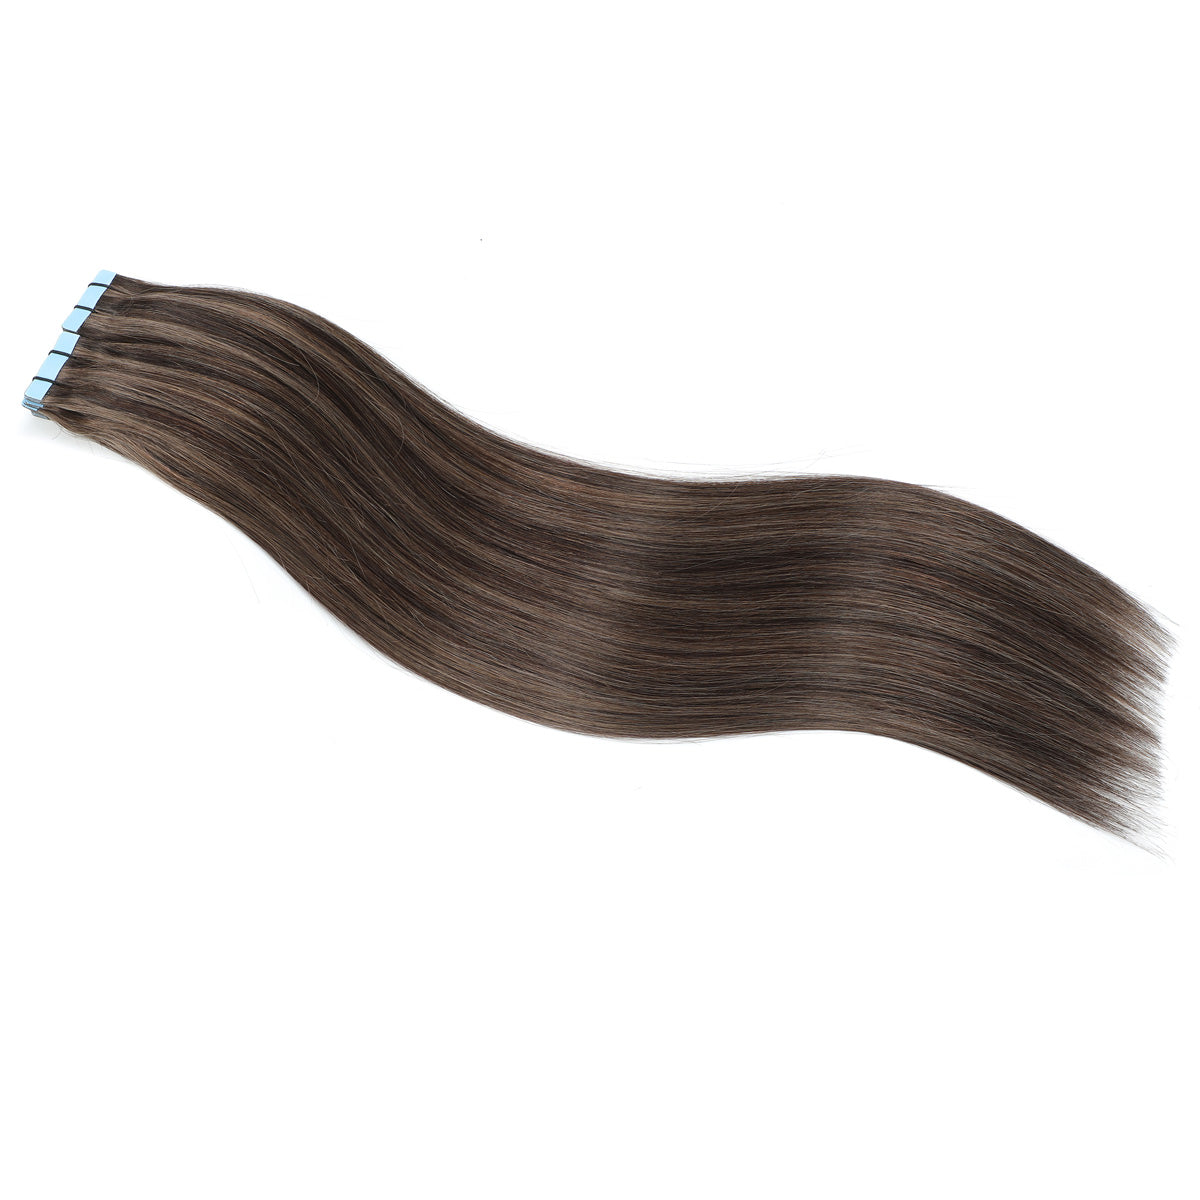 Hair Extensions Tape #2c/8a Chocolate and Ash Brown Mix 17"